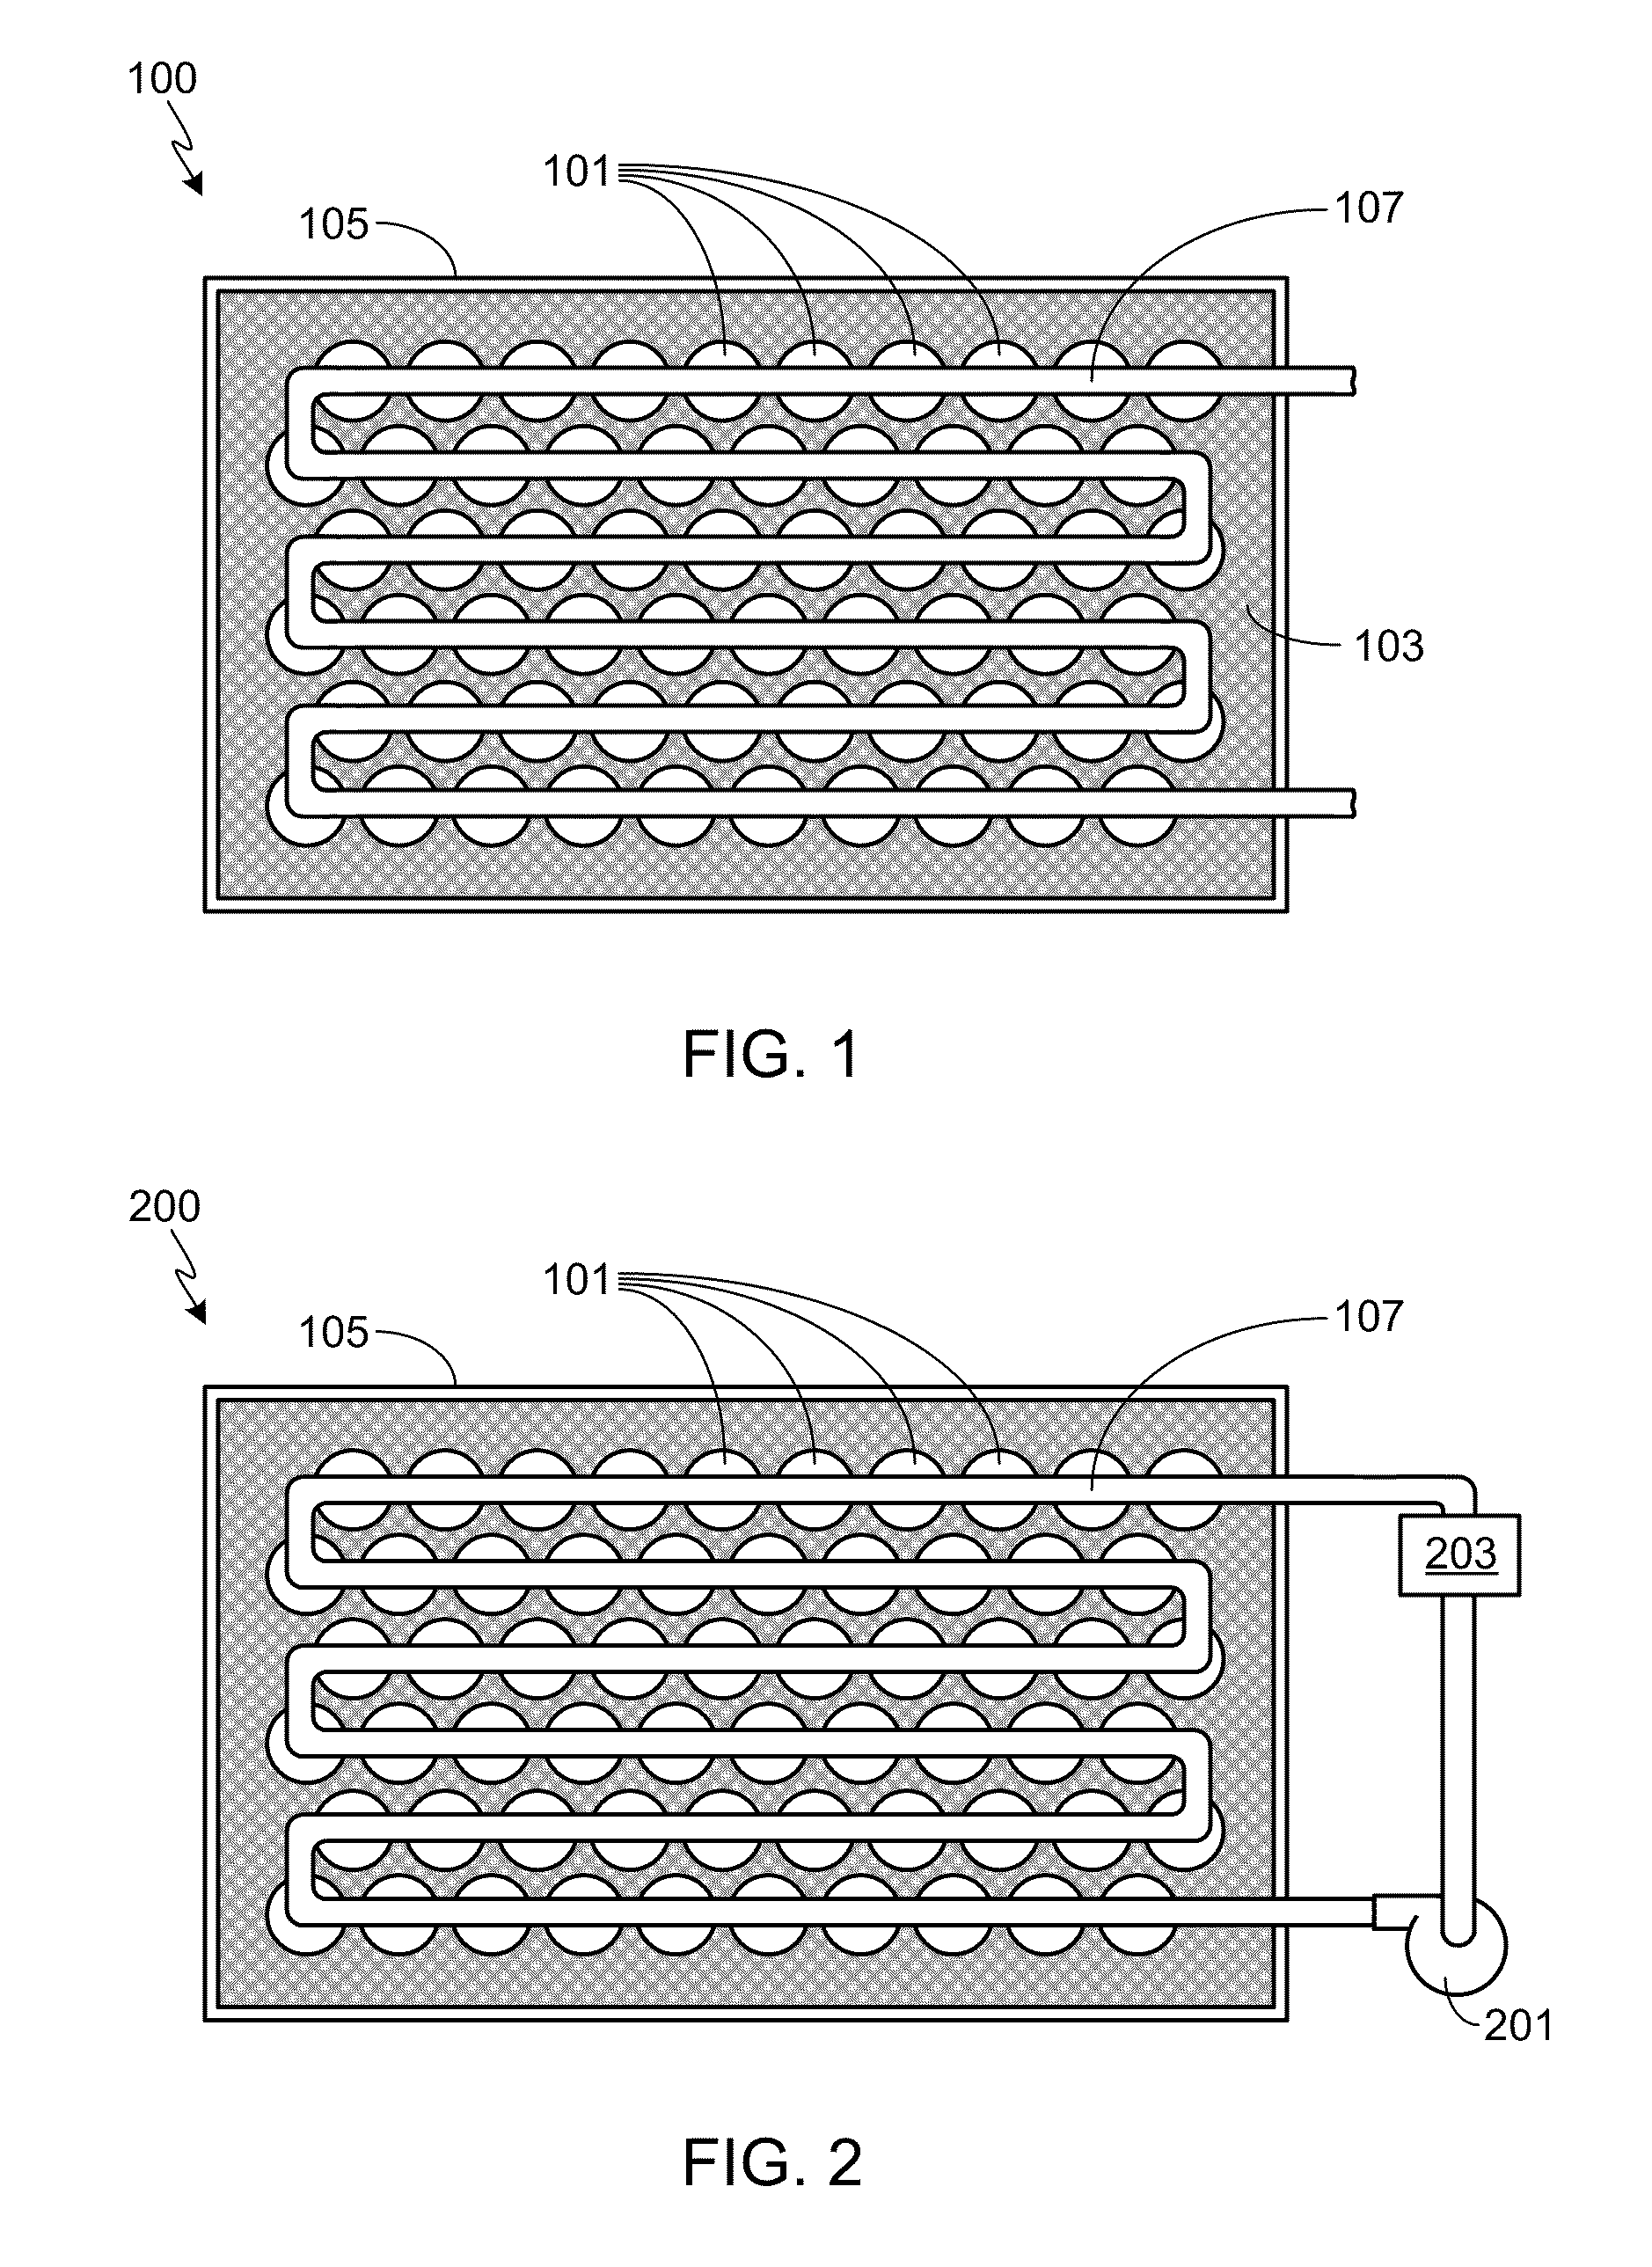 Active Thermal Runaway Mitigation System for Use Within a Battery Pack